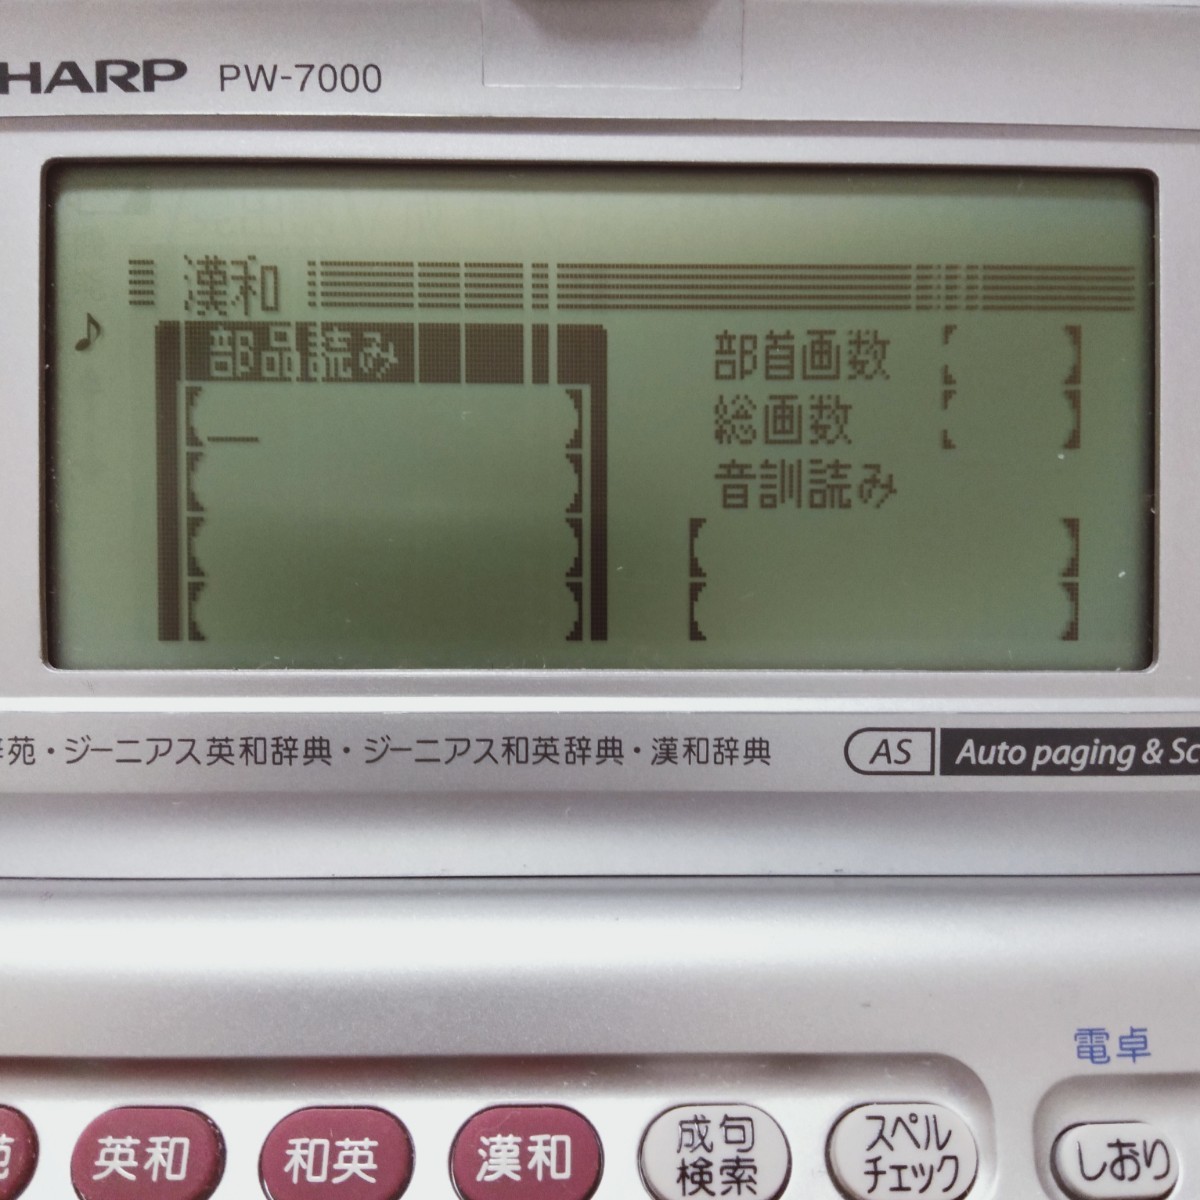  prompt decision! free shipping Junk SHARP computerized dictionary PW-7000 wide ..ji-nias English-Japanese dictionary Japanese-English dictionary Chinese-Japanese dictionary sharp 